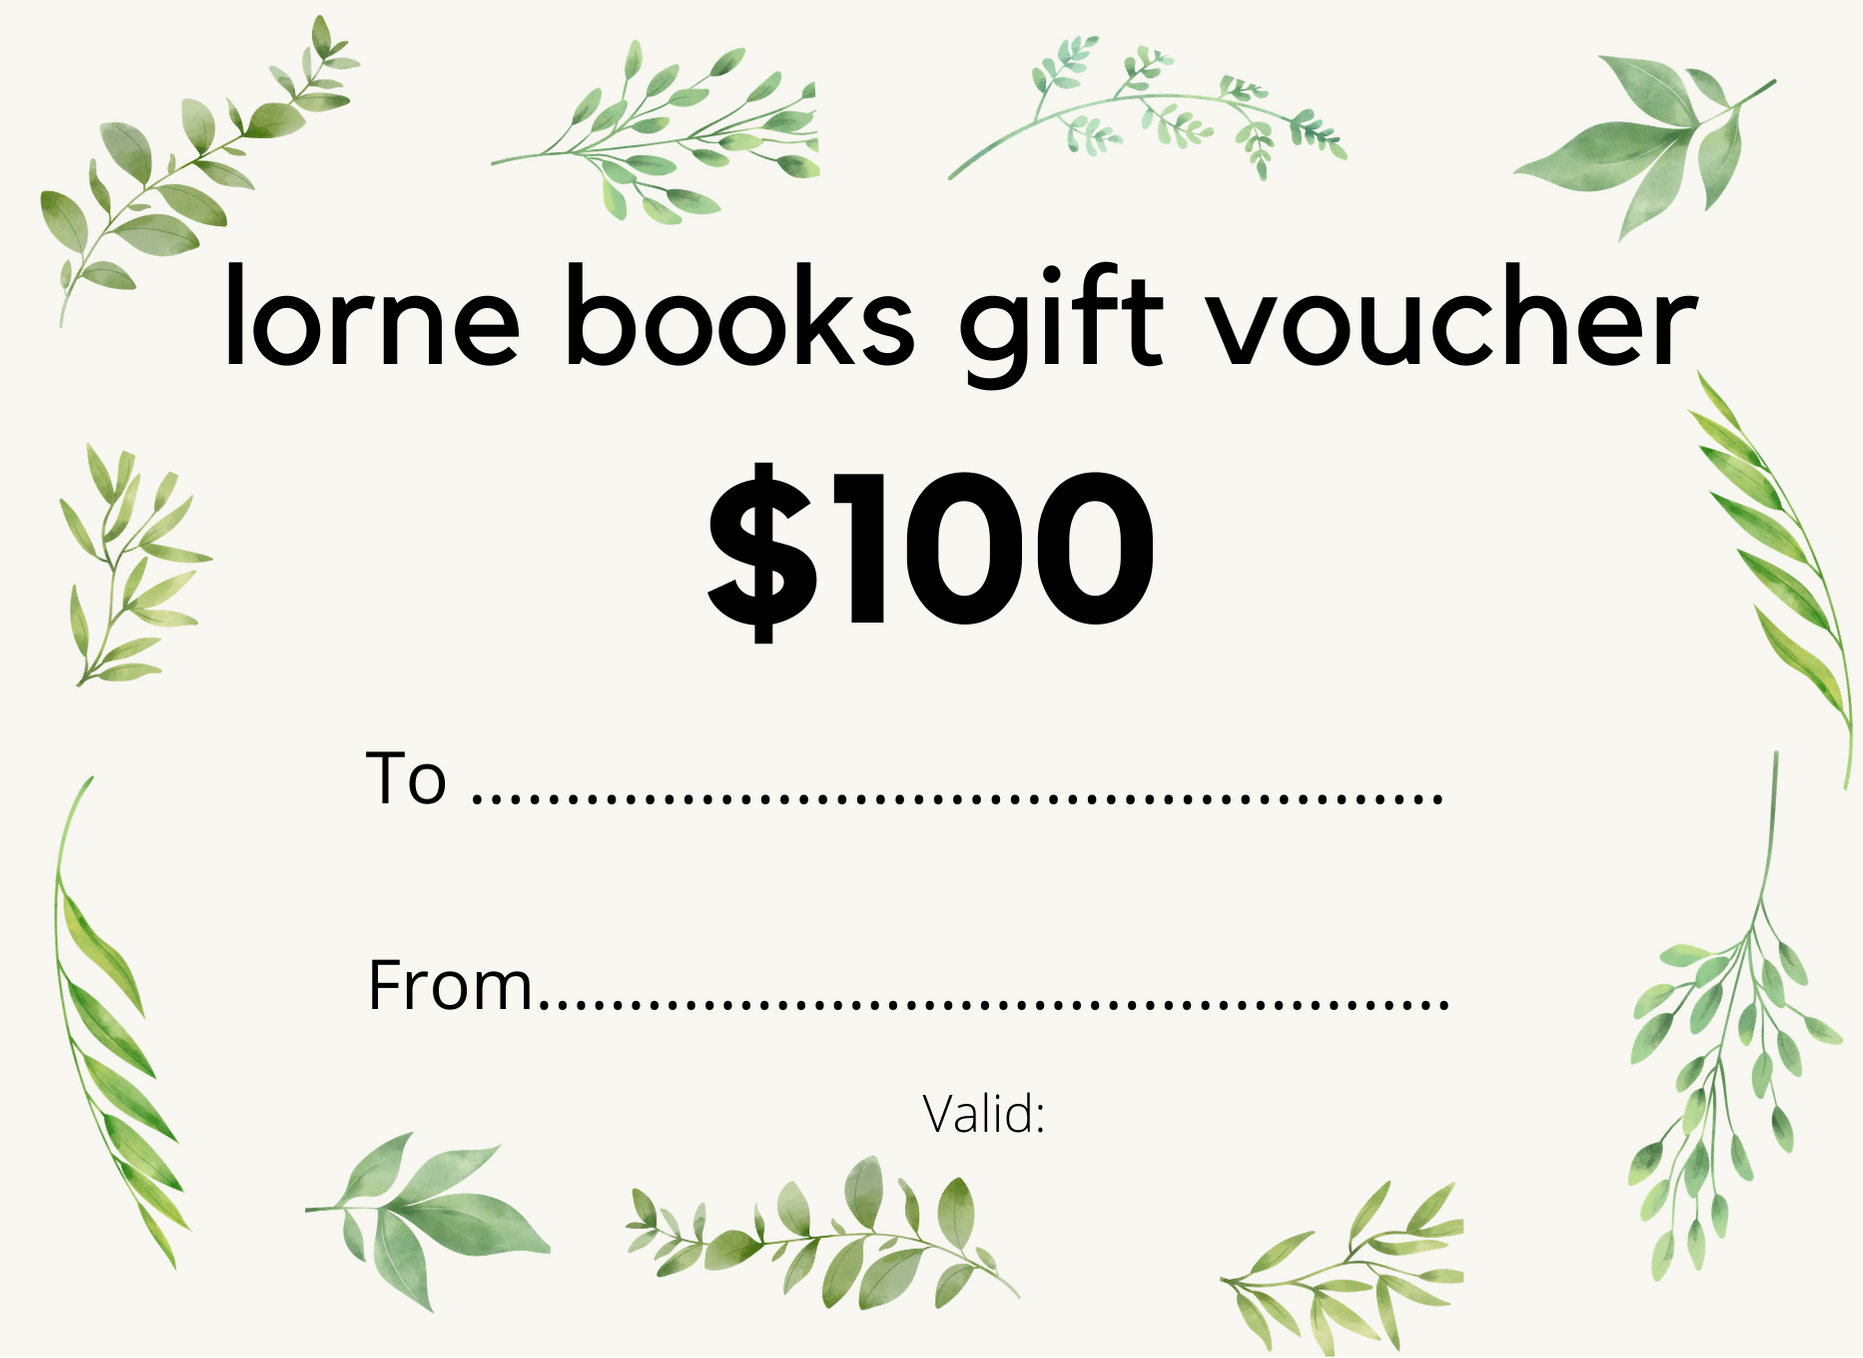 lorne books gift voucher $100.png